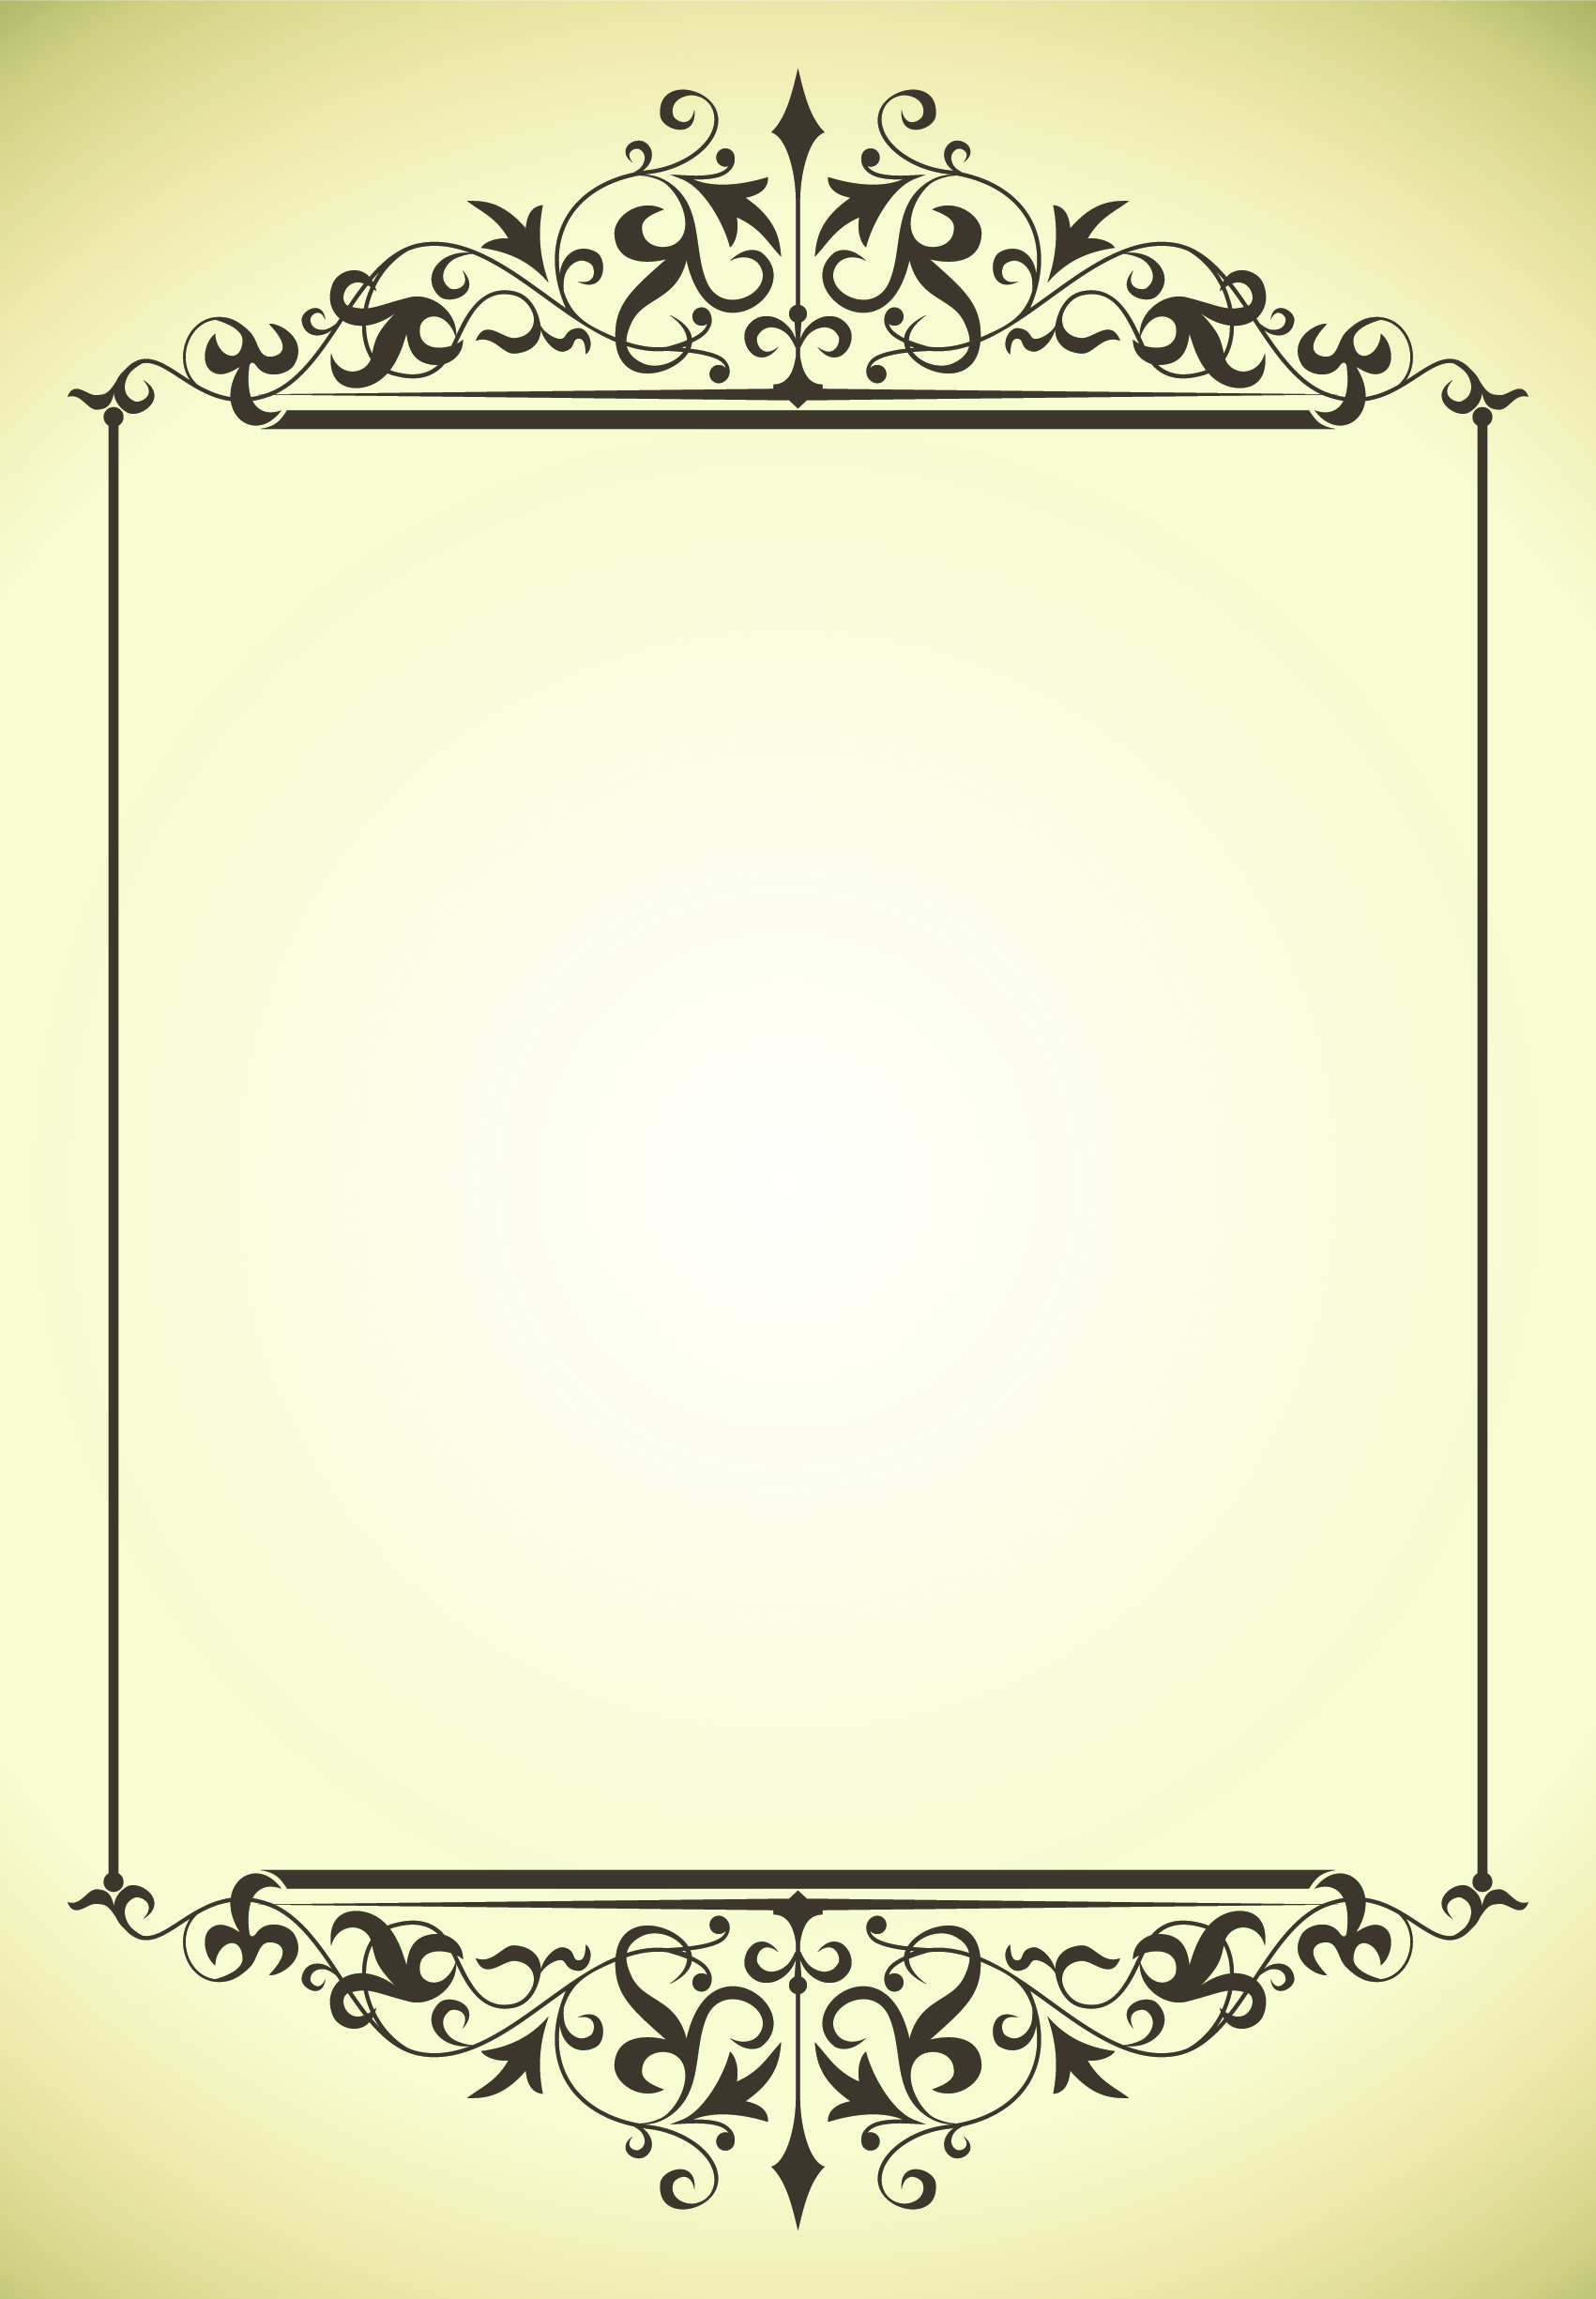 Free Vector Borders, Download Free Vector Borders png images, Free